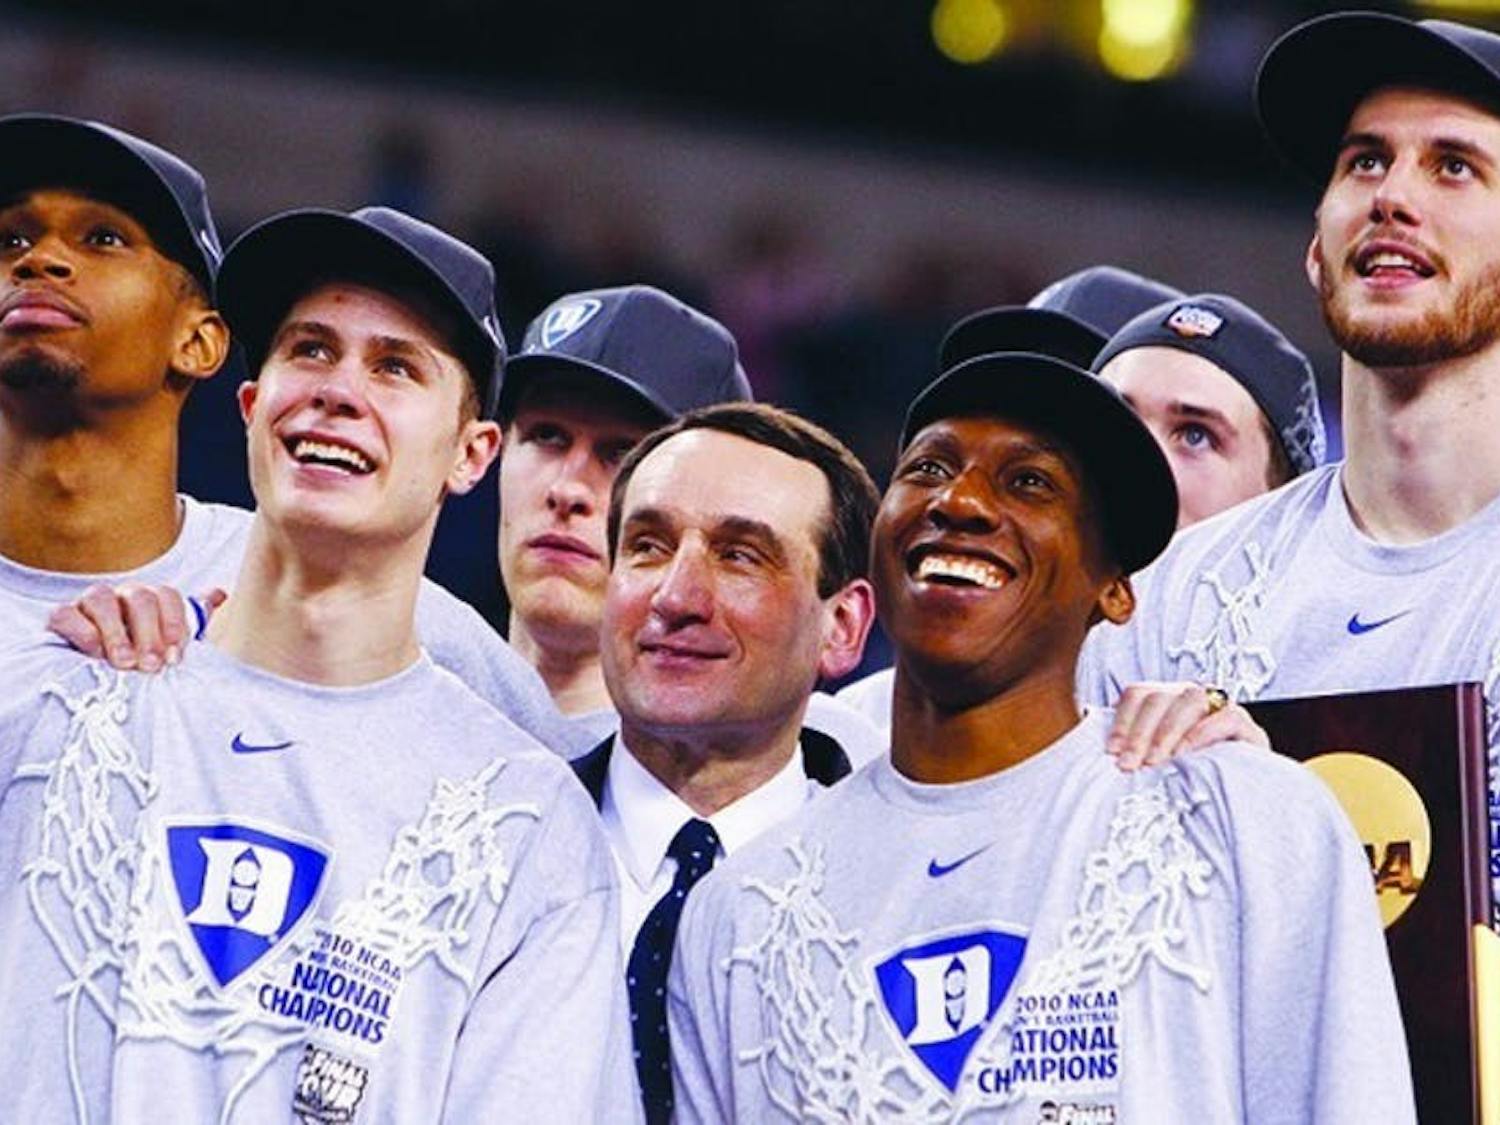 Lance Thomas (far left) and teammates right after the Blue Devils' 2010 national championship victory.